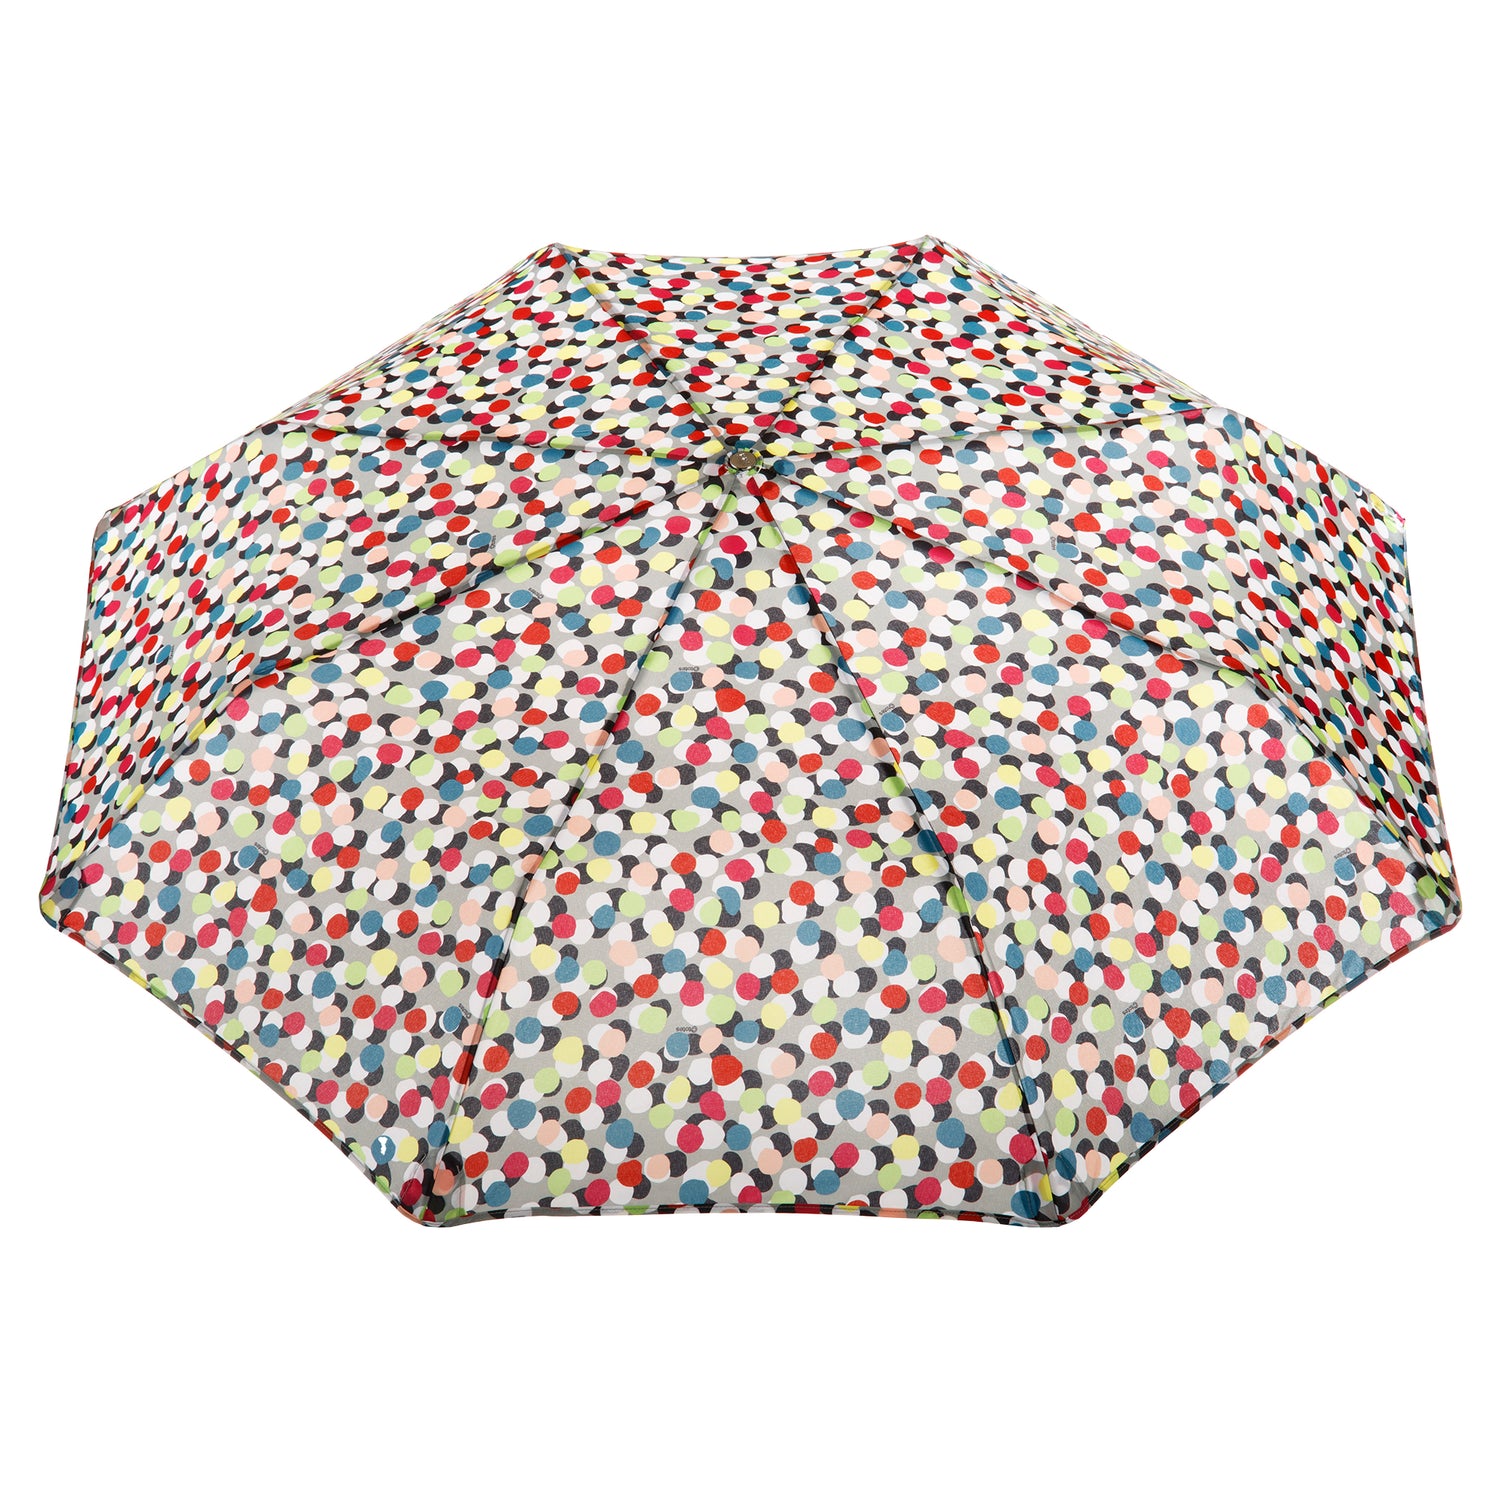 Recycled Total Protection Compact Umbrella with Sunguard Technology